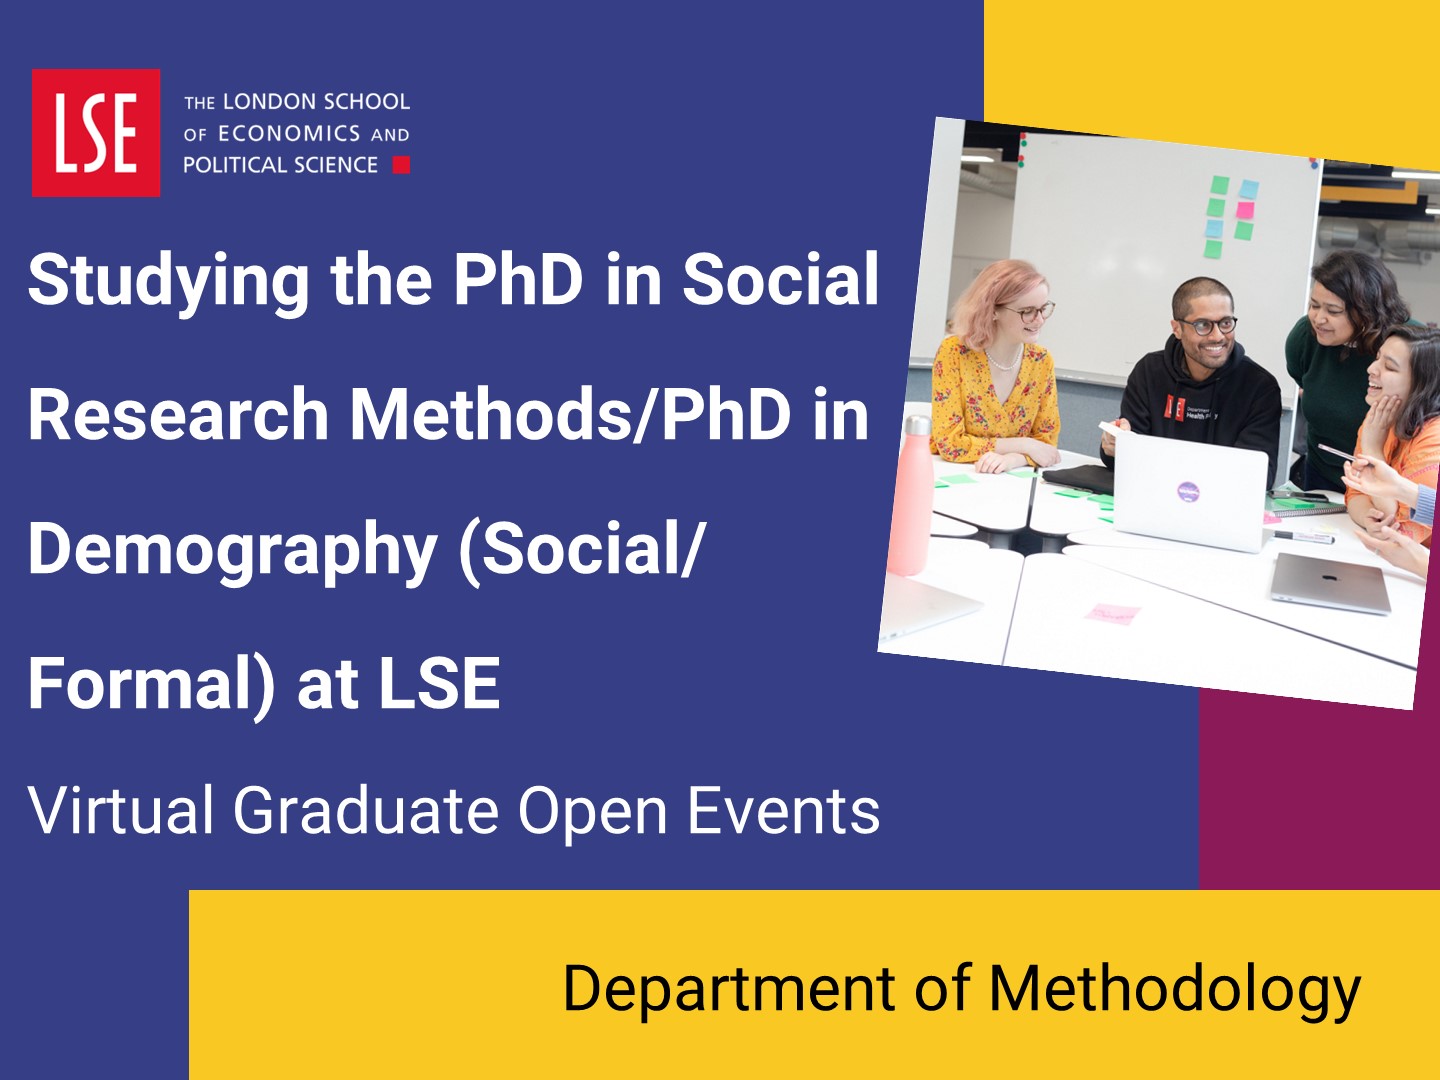 Studying the PhD in Social Research Methods / PhD in Demography (Social/ Formal) at LSE